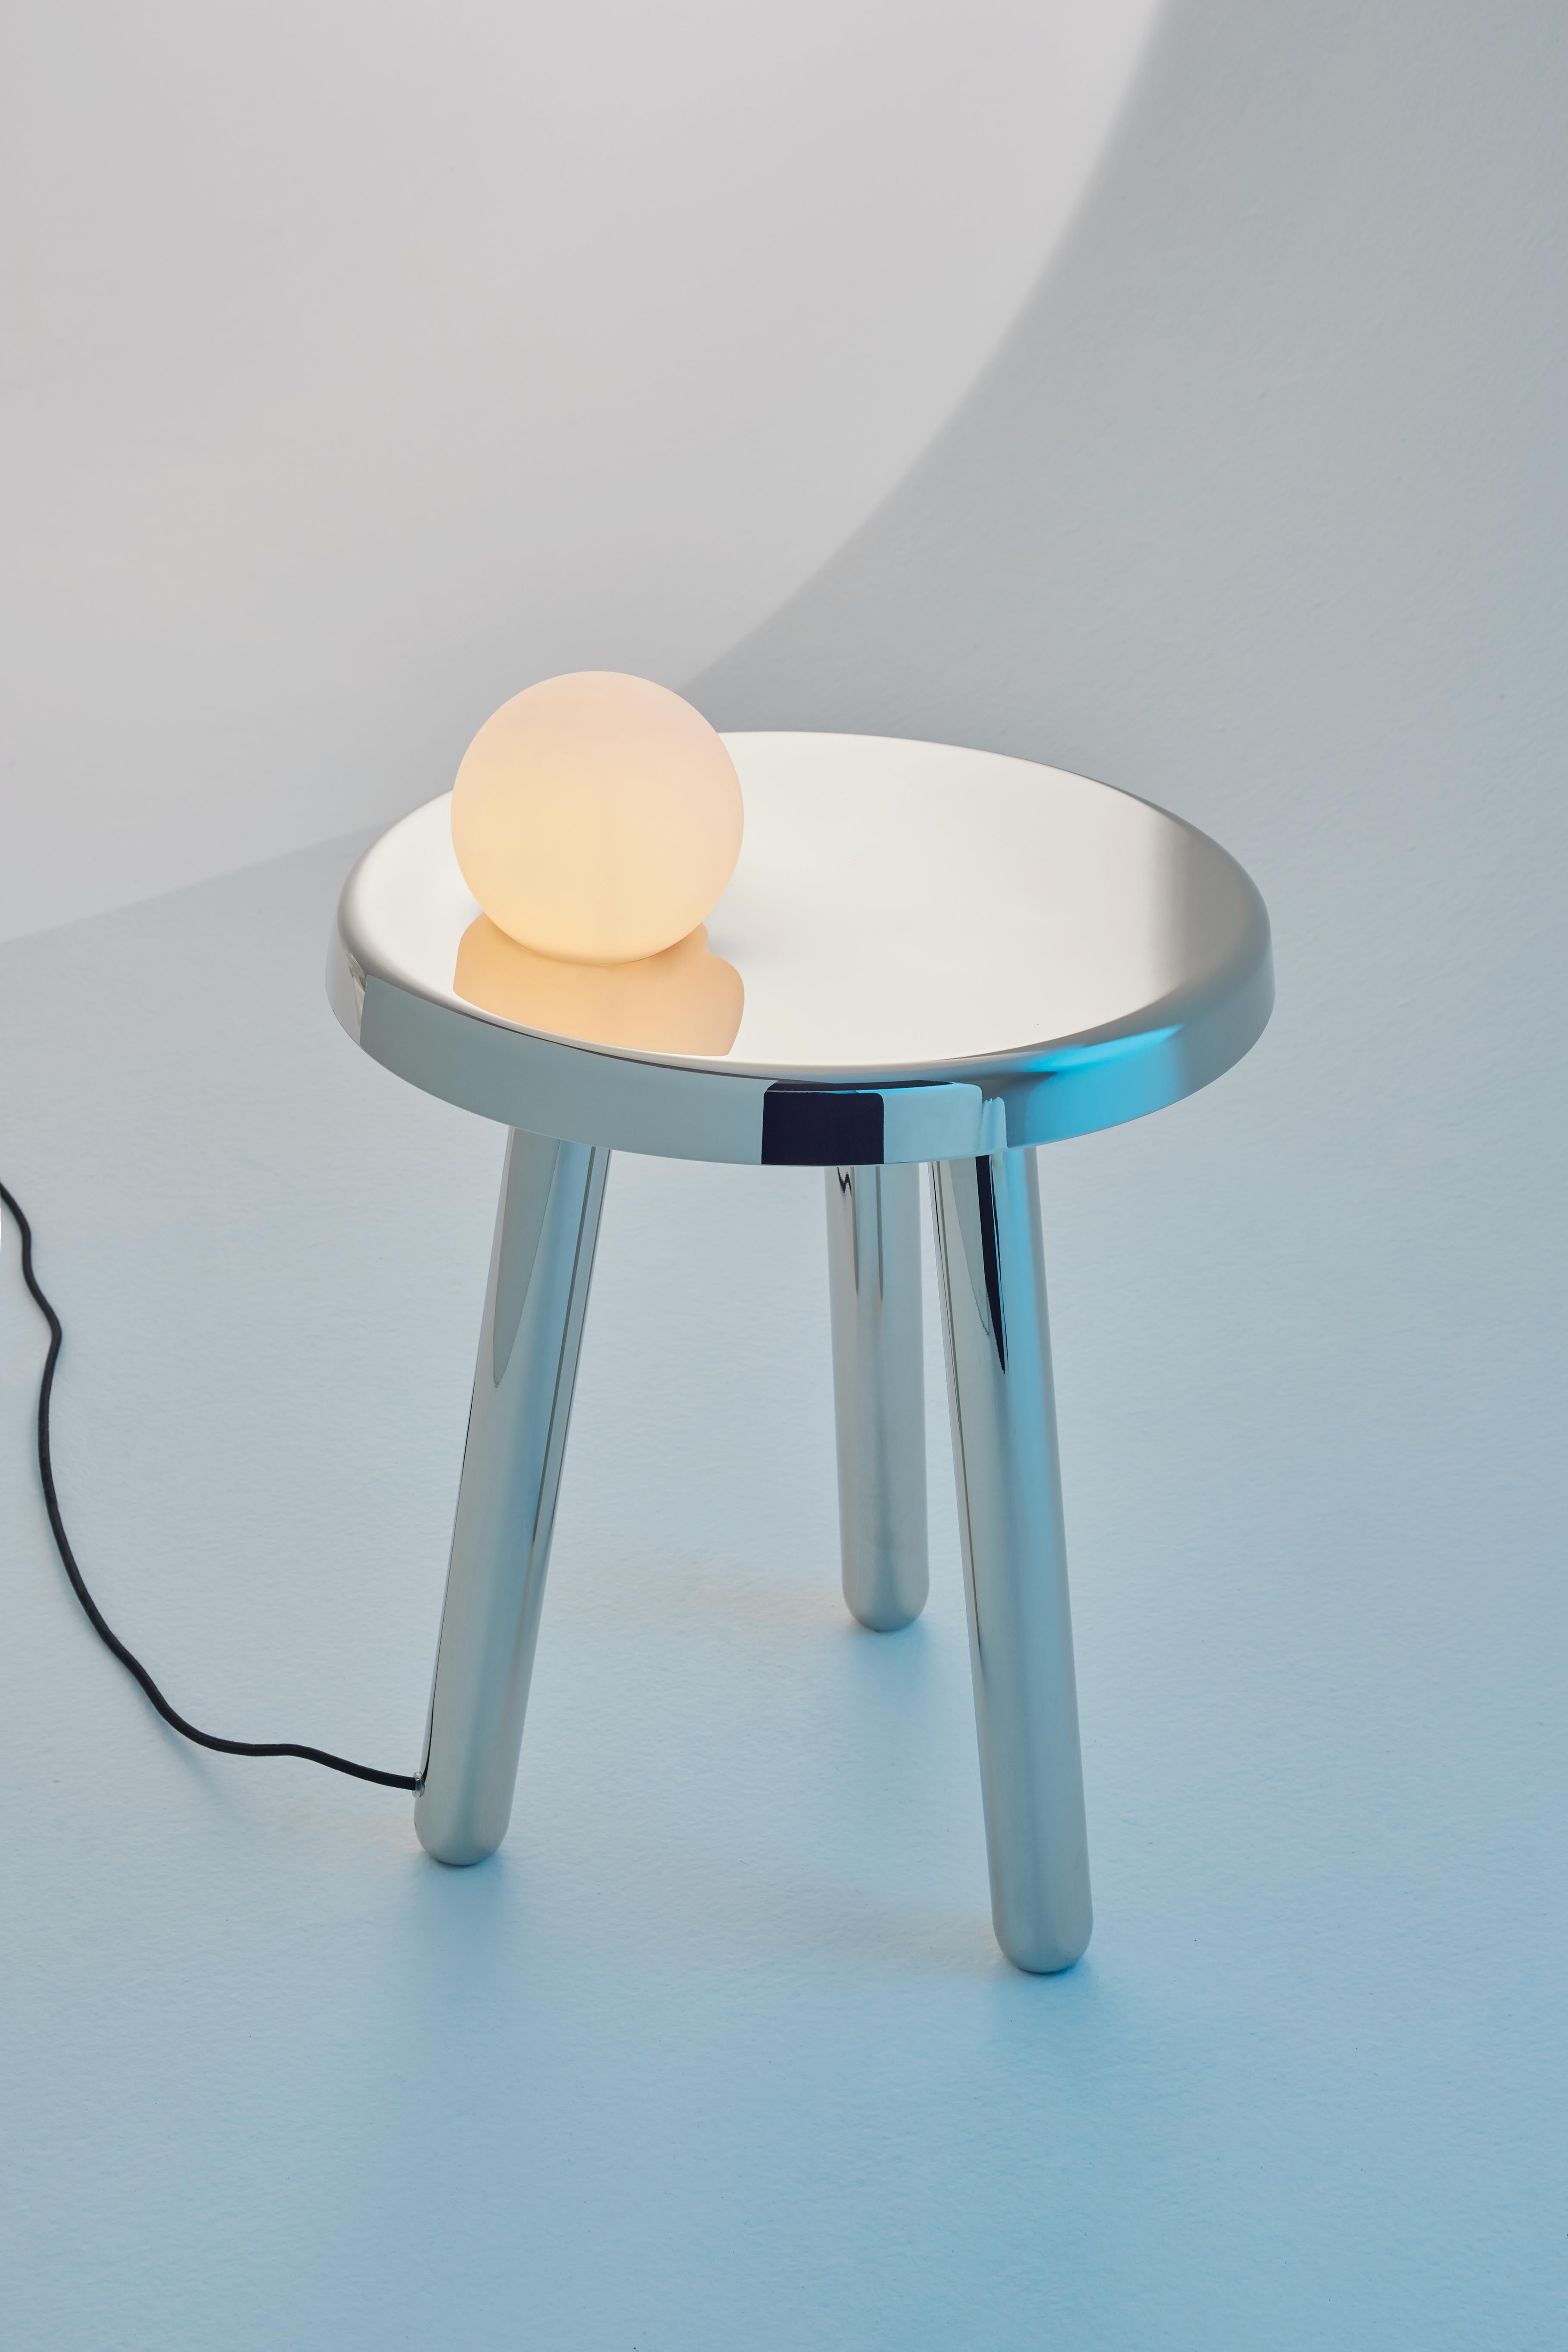 Alby Black Small Table with Lamp by Mason Editions 1